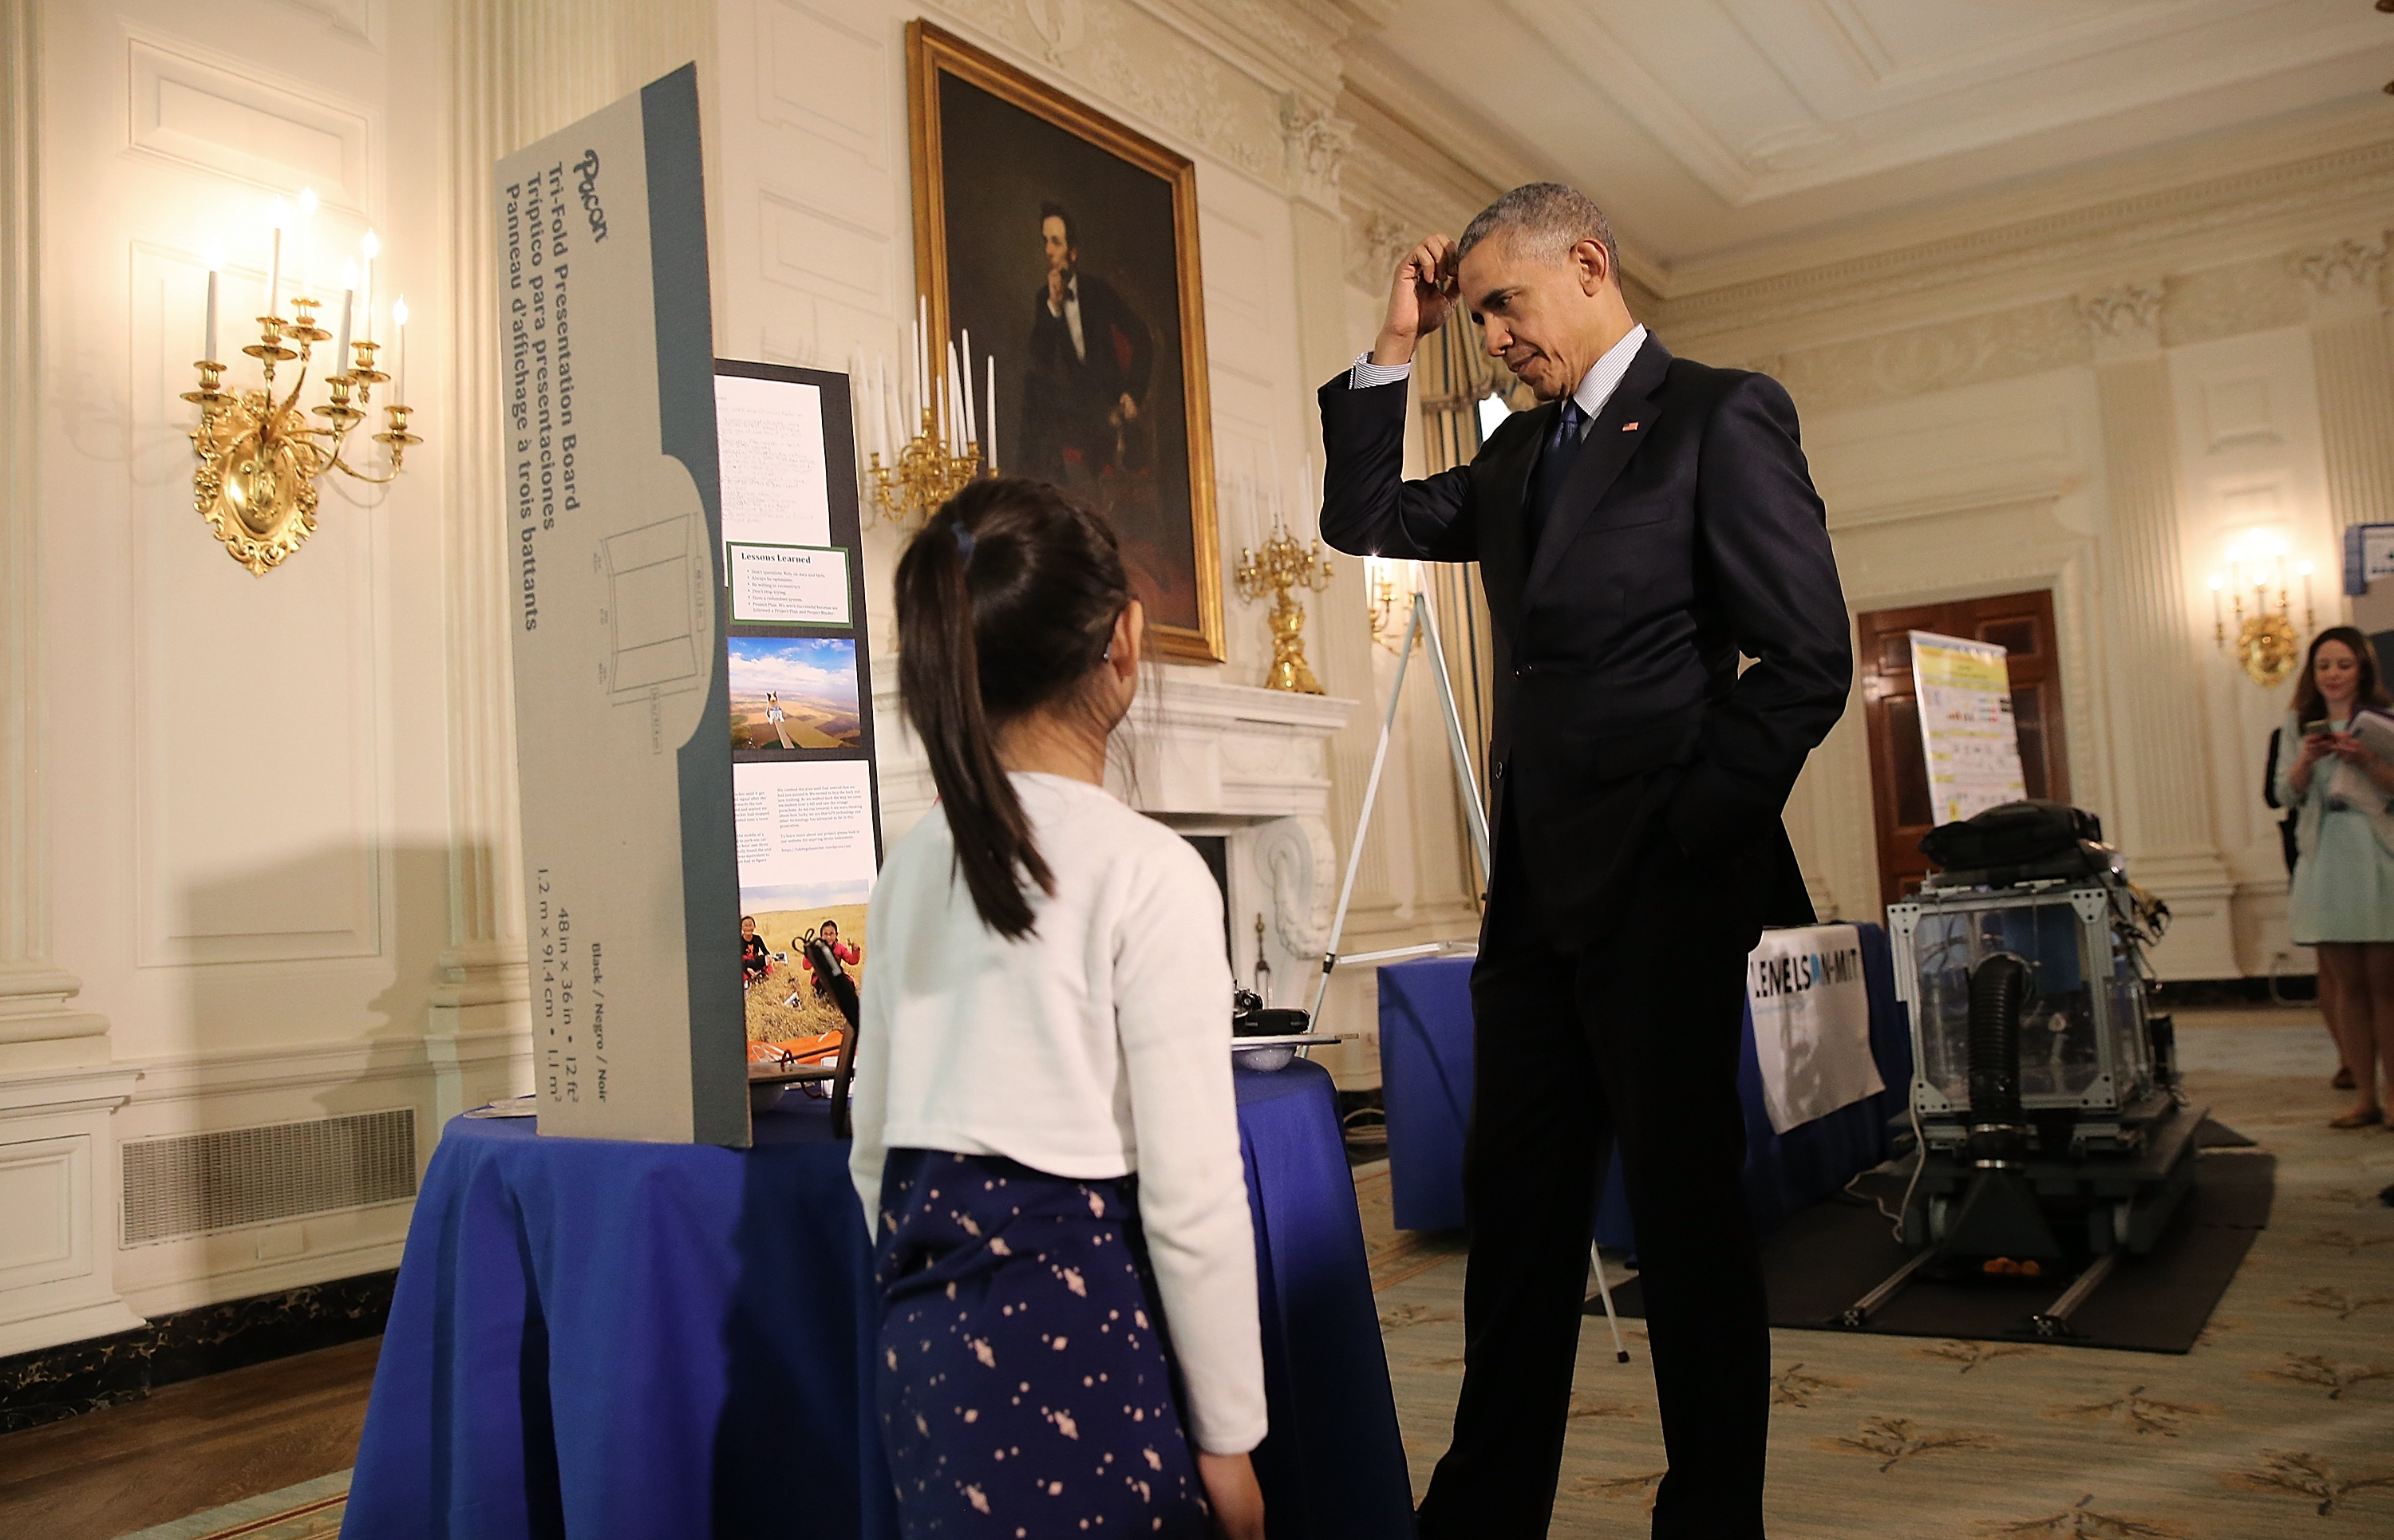 President Obama Attends White House Science Fair